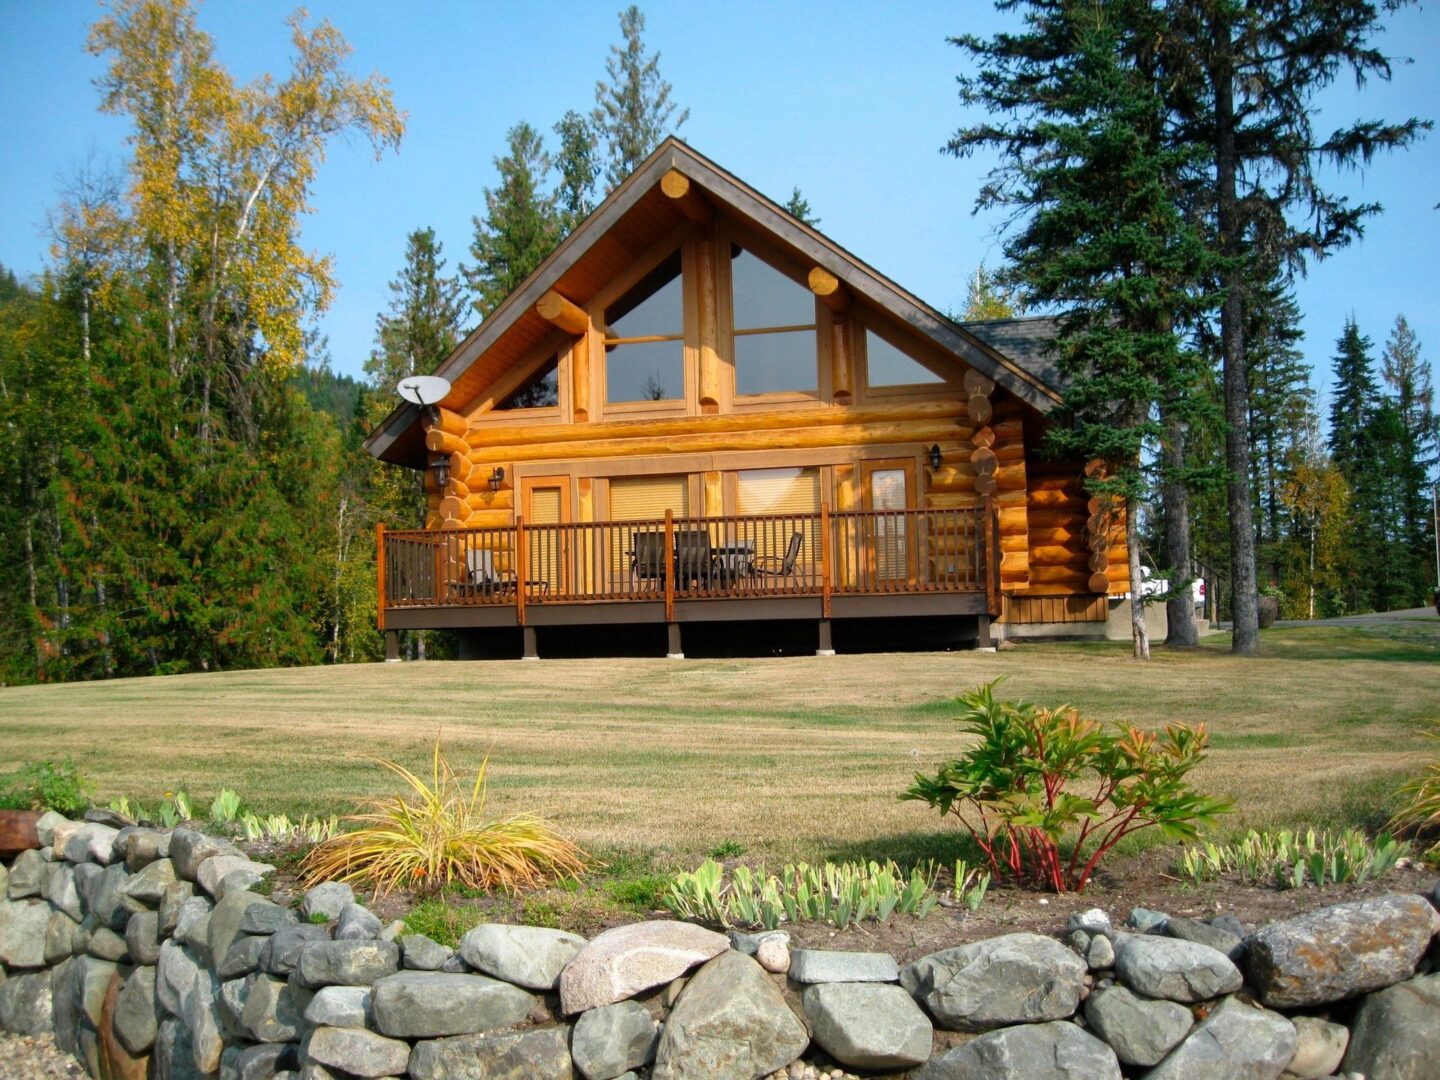 A log cabin with a stone wall in the foreground.